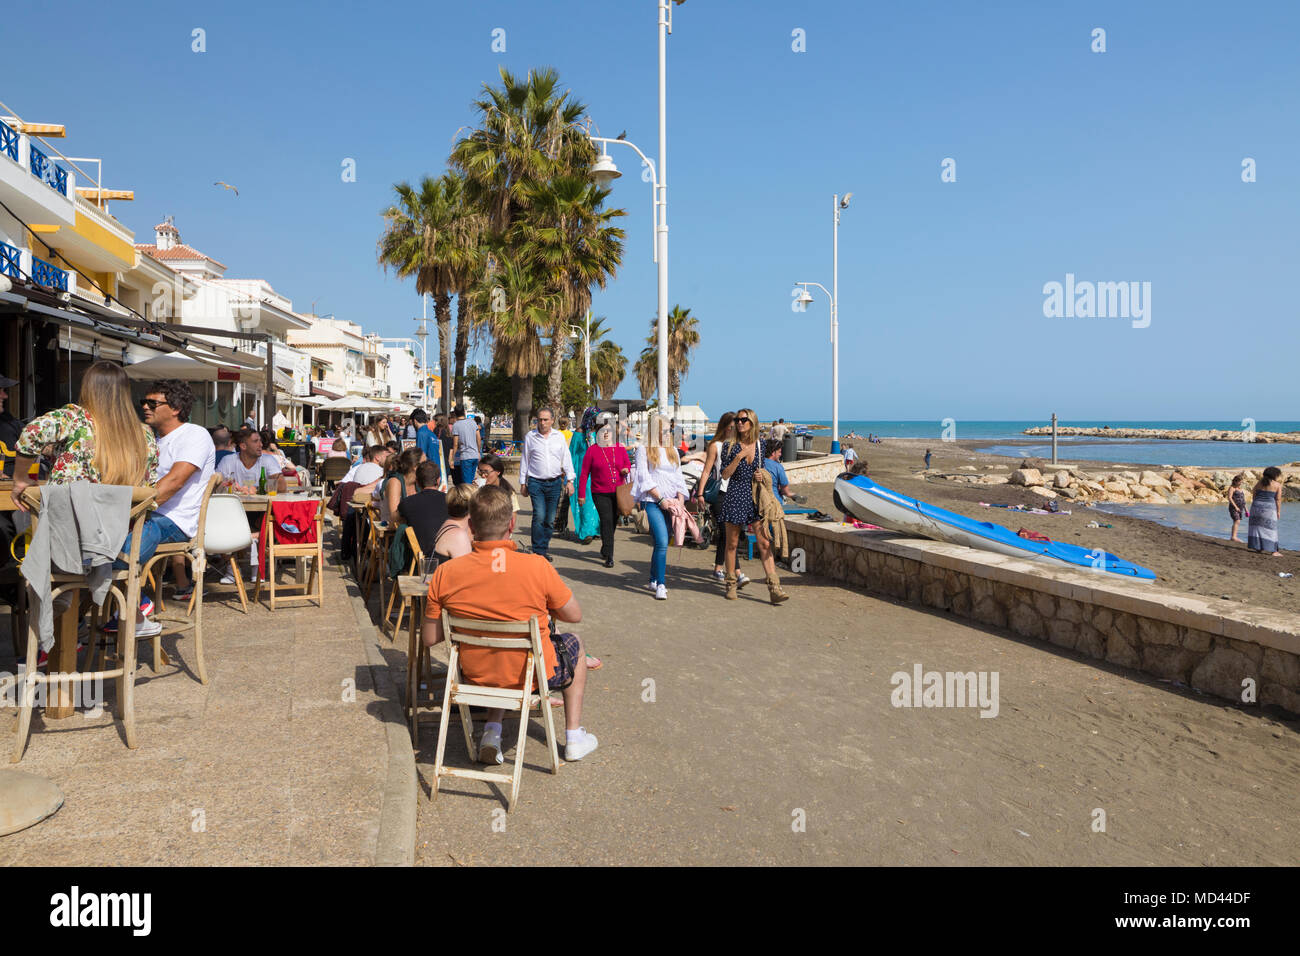 Restaurants and cafes along the Paseo Maritimo el Pedregal in the Pedregalejo area, Malaga, Costa del Sol, Andalucia, Spain, Europe Stock Photo